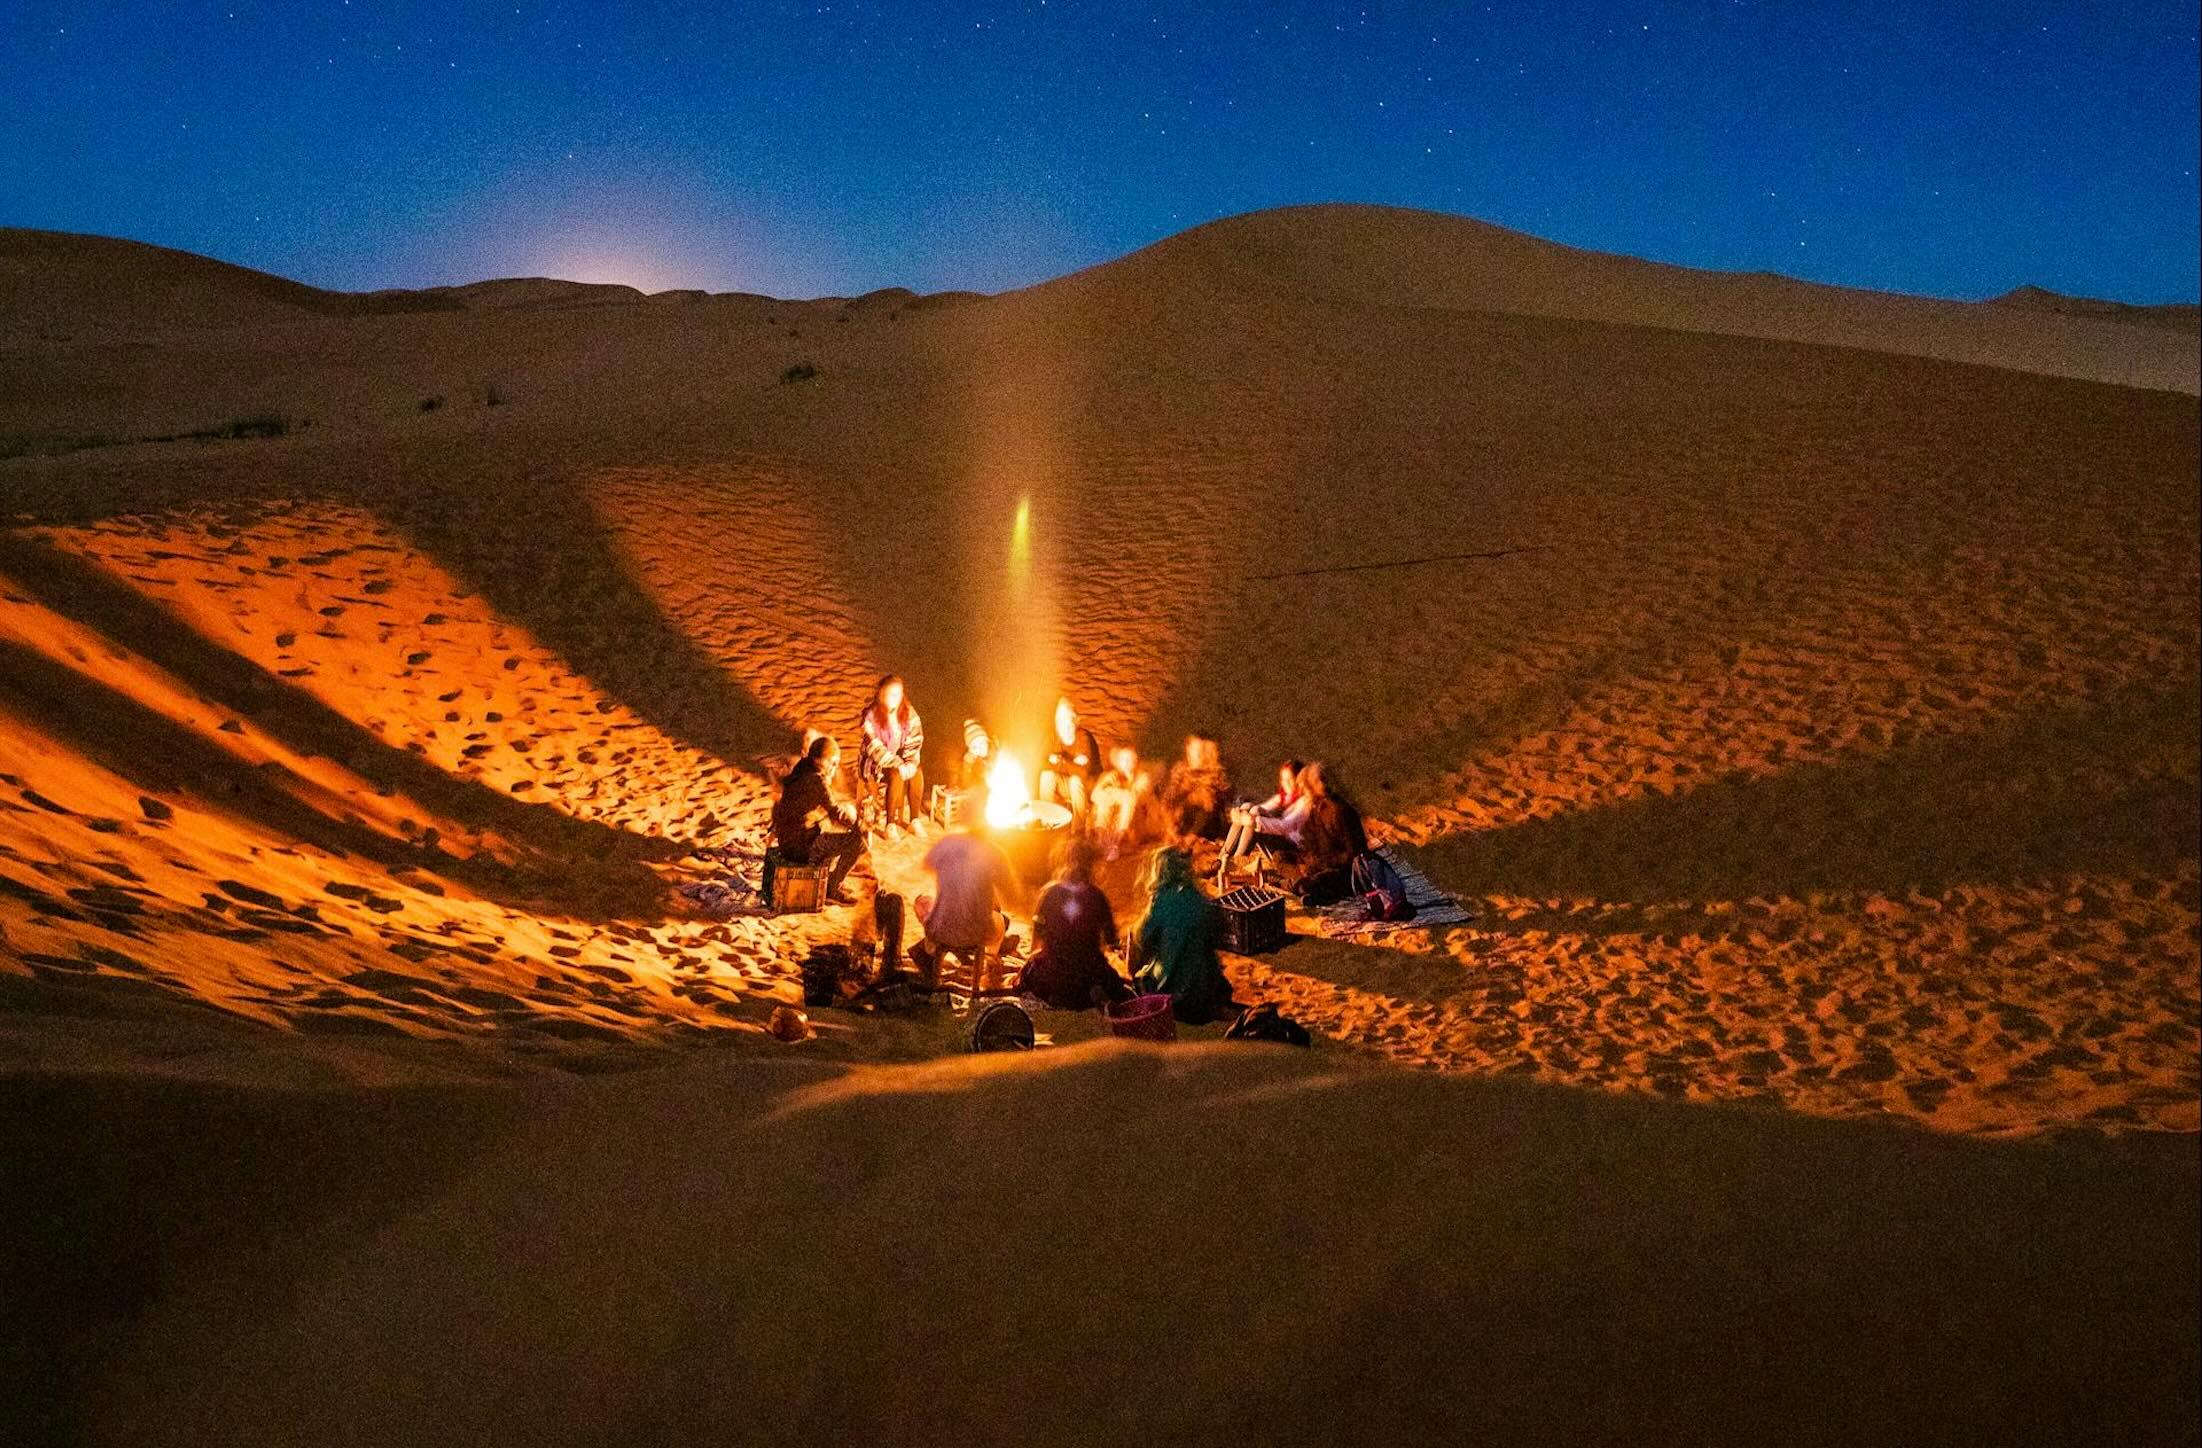 Riyadh Exit opens a cool camping experience 